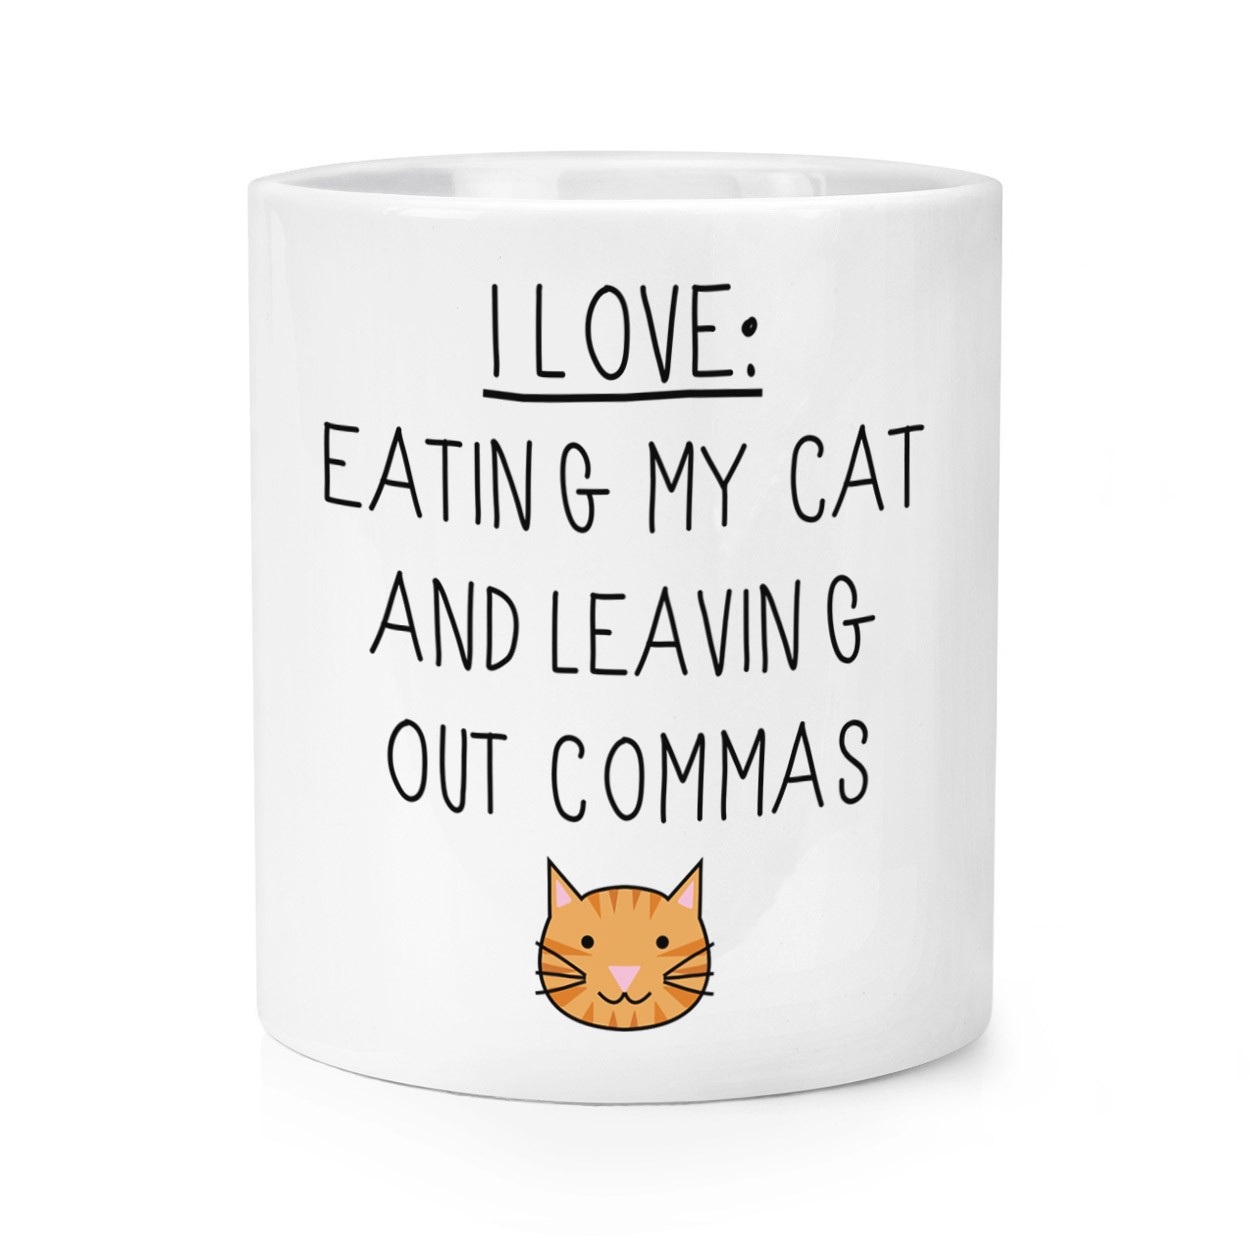 I Love Eating My Cat and Leaving Out Commas Makeup Brush Pencil Pot